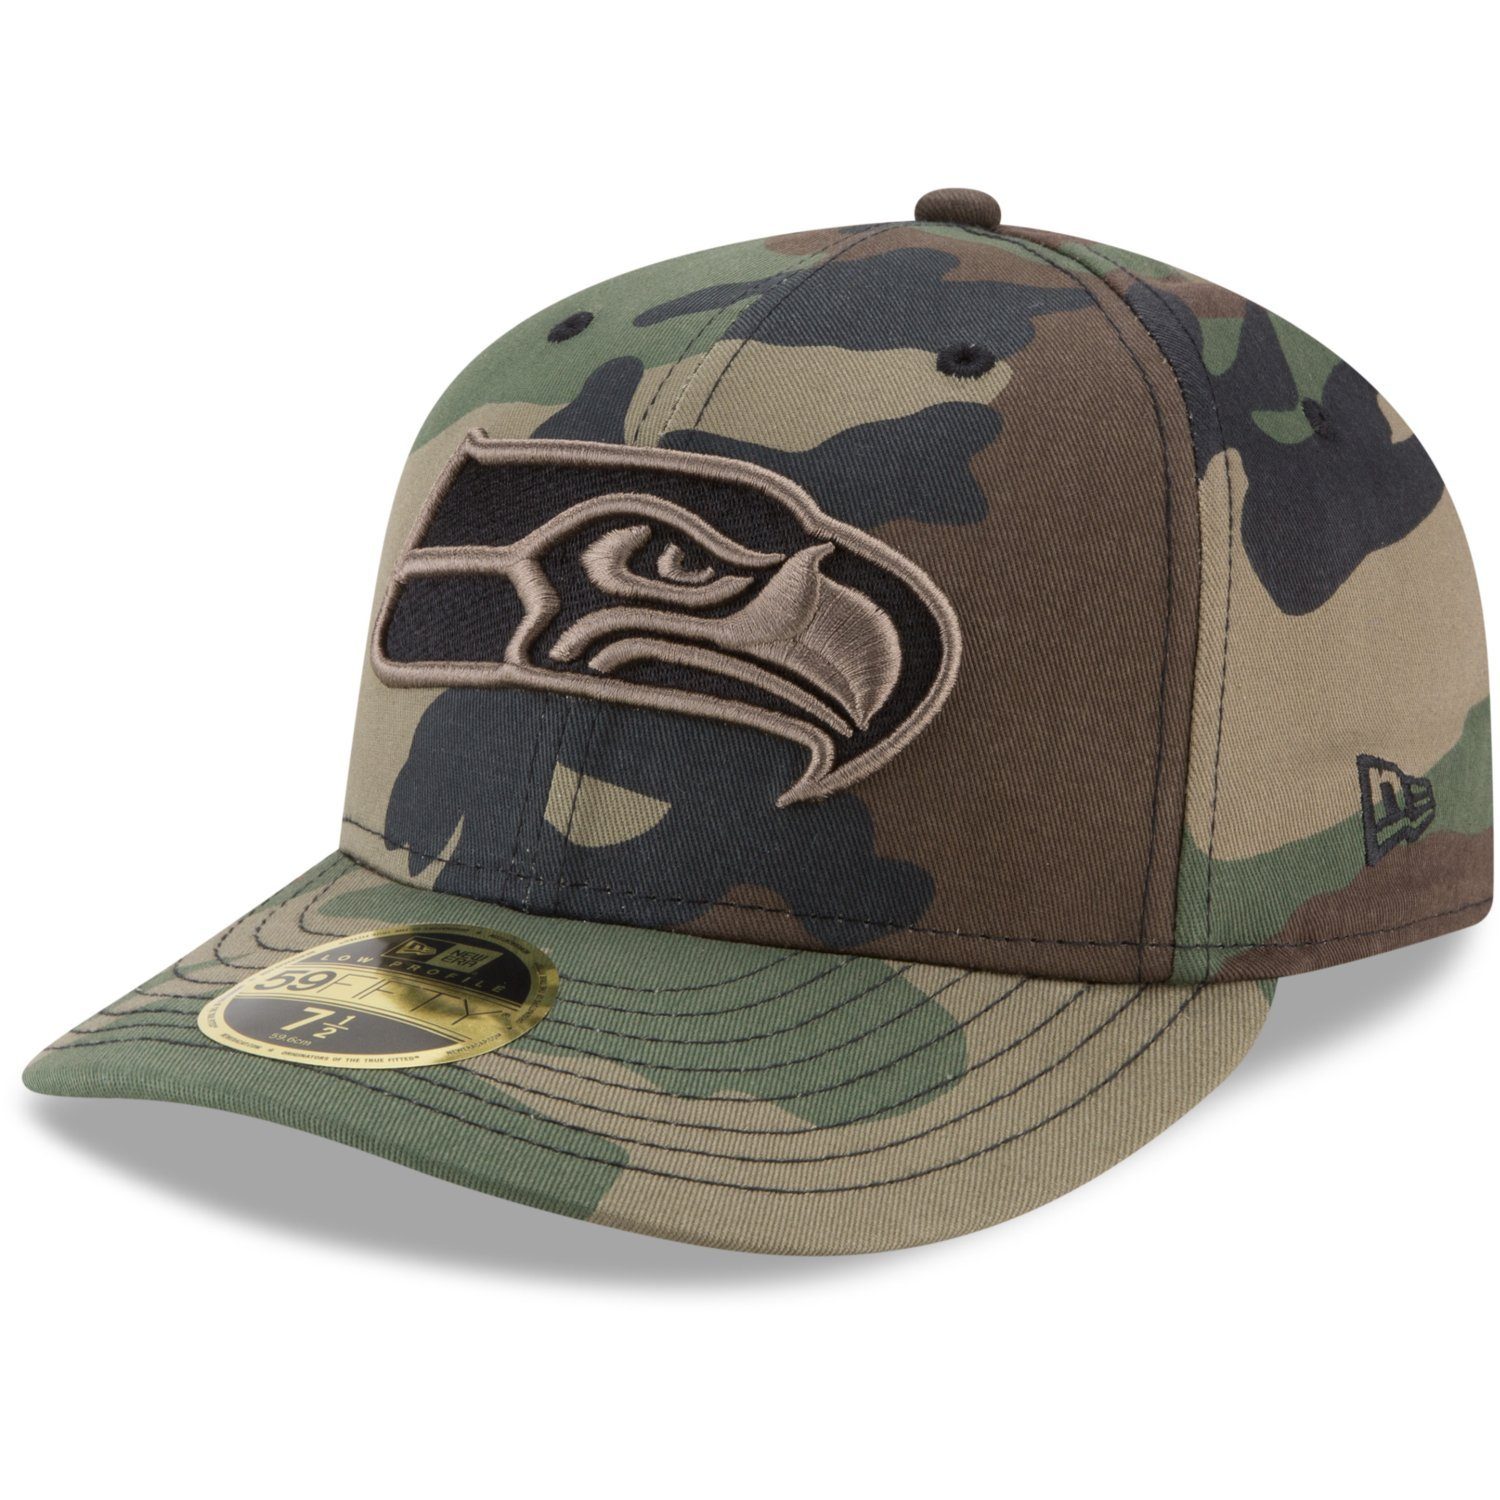 New Era Fitted Cap Seattle Teams Seahawks NFL 59Fifty Profile woodland Low